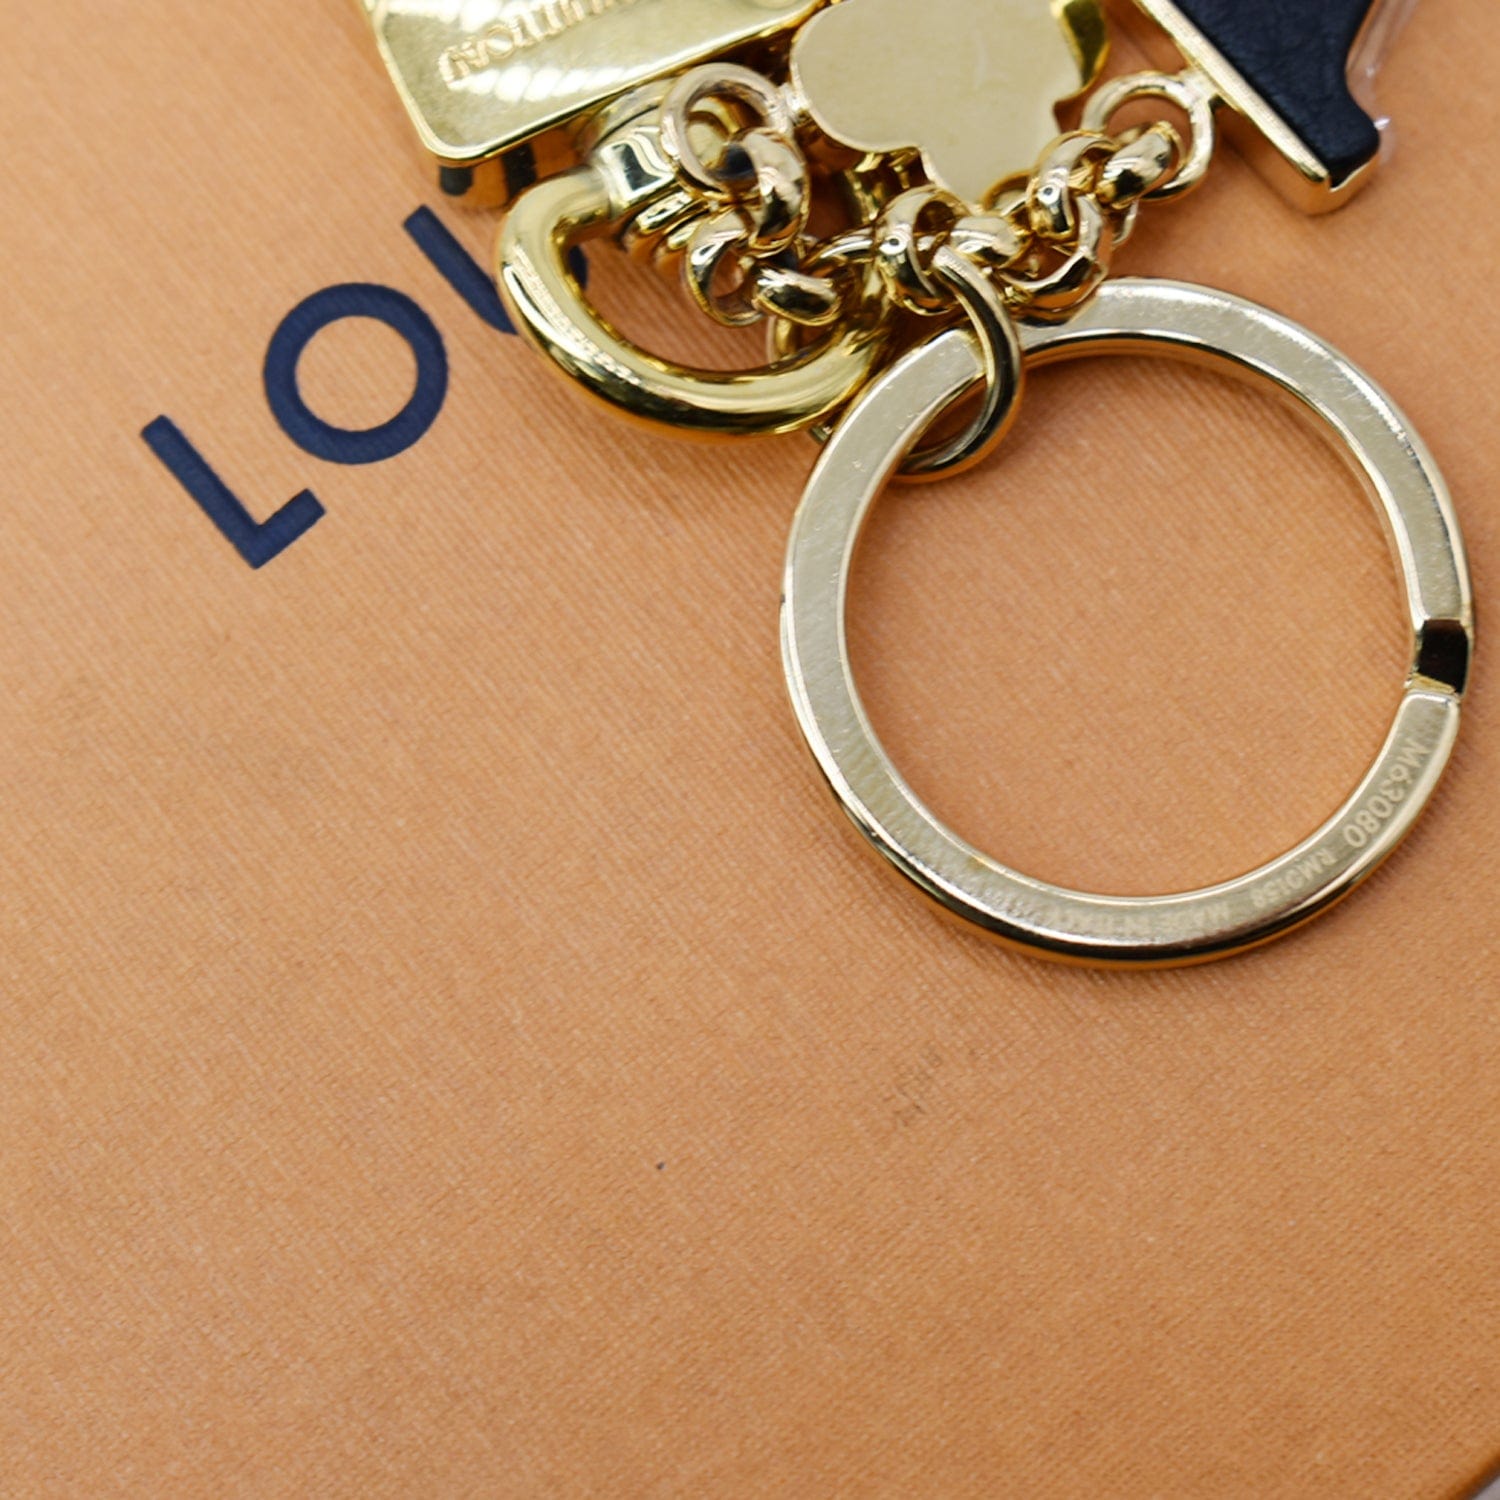 Louis Vuitton LV Capucines Bag Charm and Key Holder